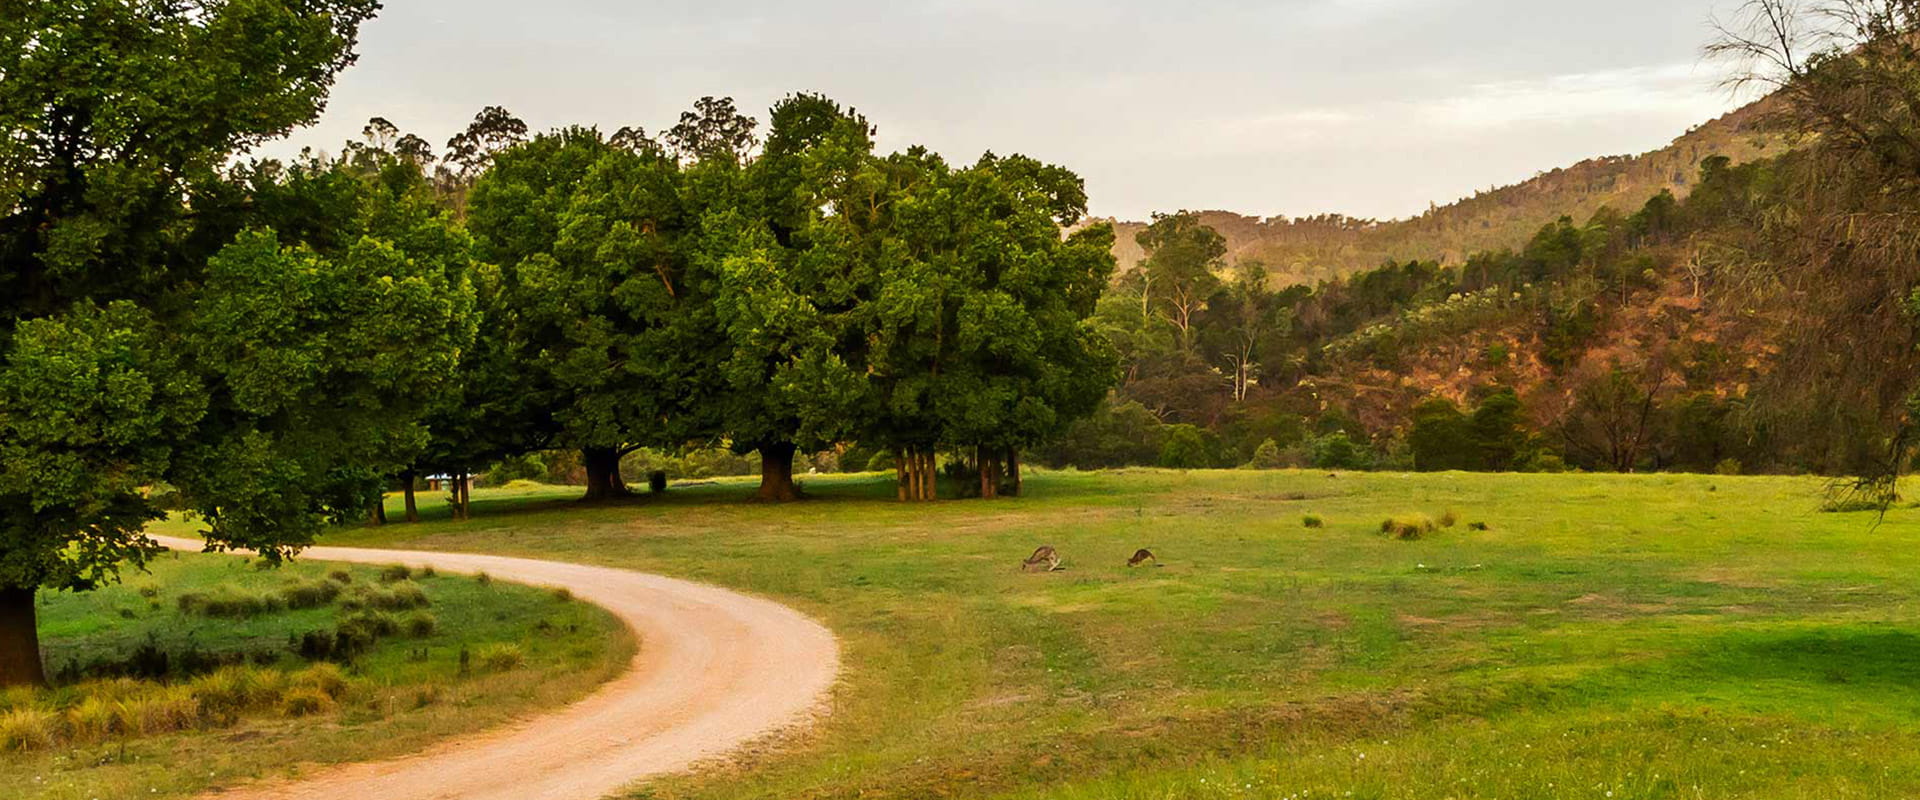 An open green grassland surrounded by hills and rugged bushland with kangaroos feeding on the grass